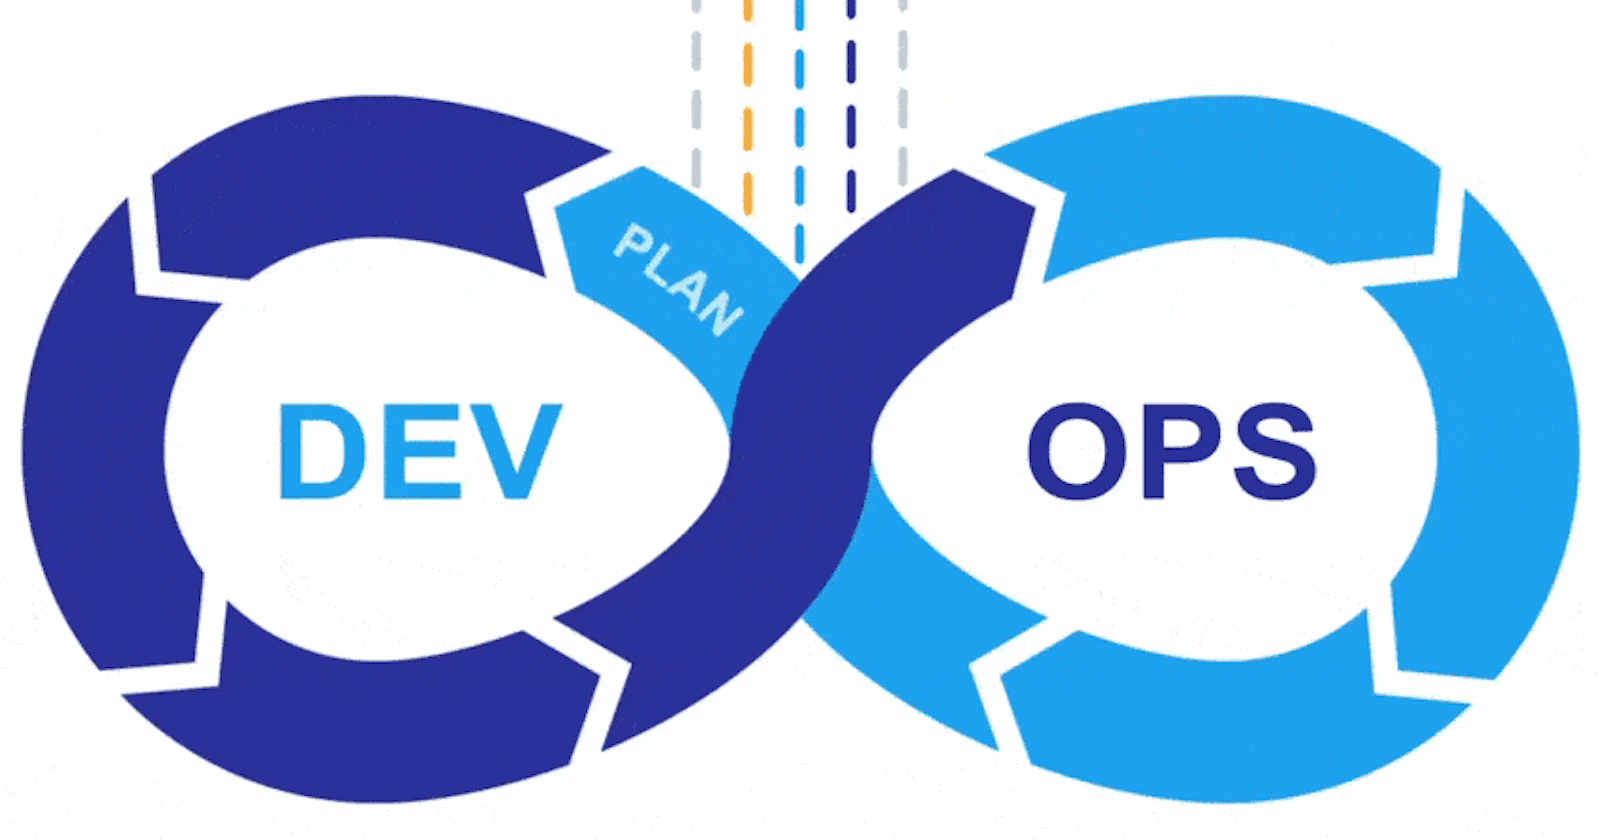 Teams must follow key DevOps principles to fully realize the potential of DevOps ♾️.